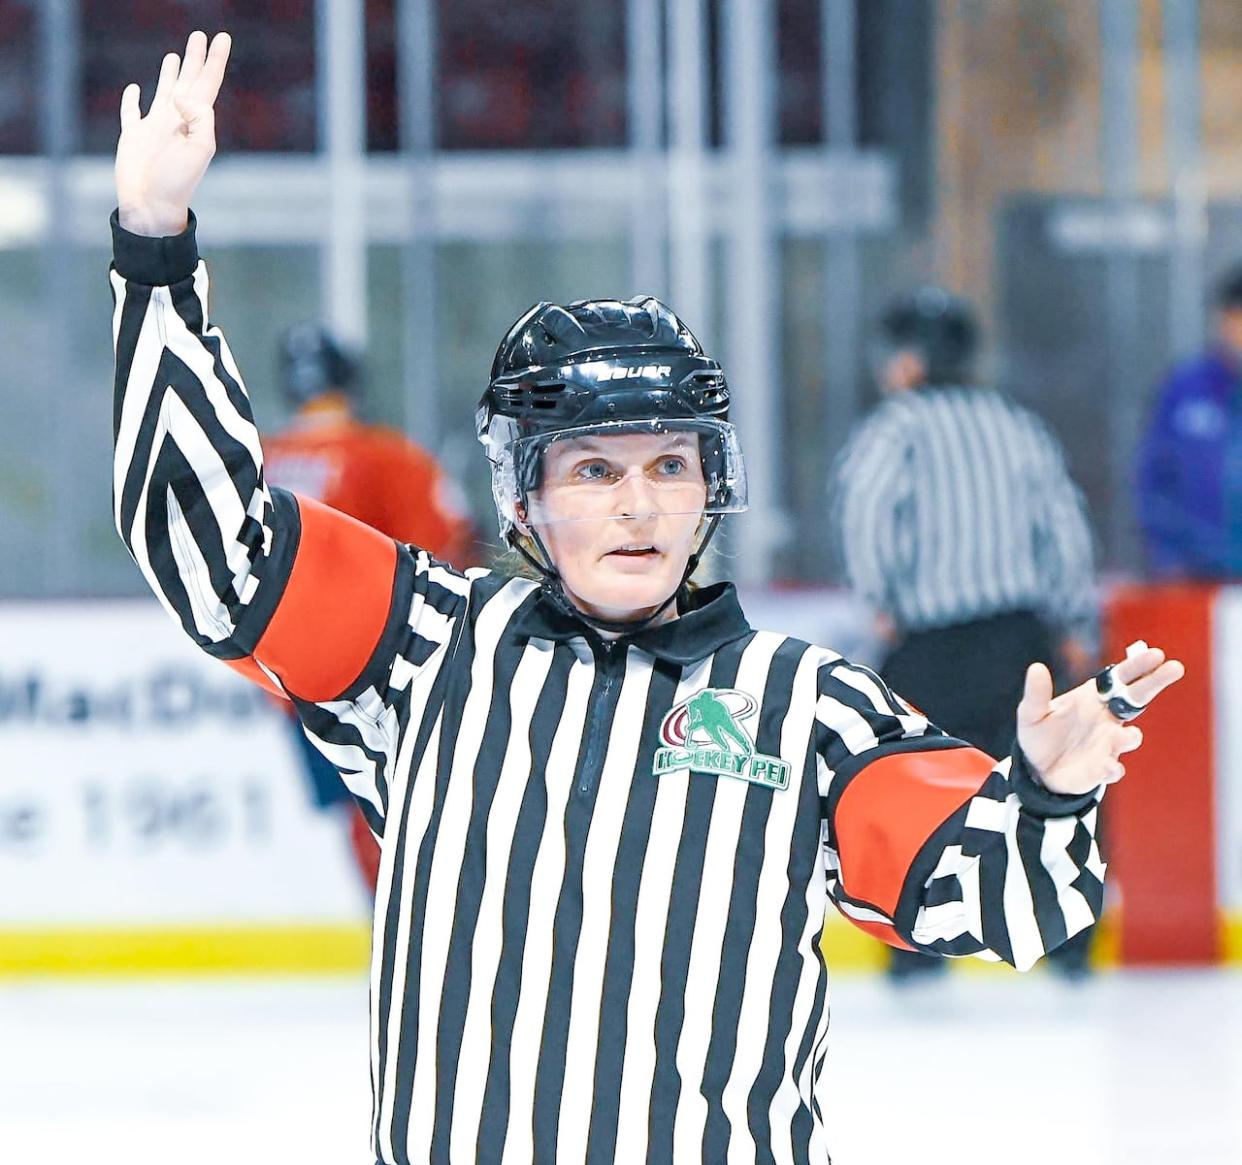 Ellen Dixon made her official debut as a referee in the Maritime Junior Hockey League at a game in Summerside on Dec. 7.   (Ronnie MacKenzie/Summerside Western Capitals - image credit)